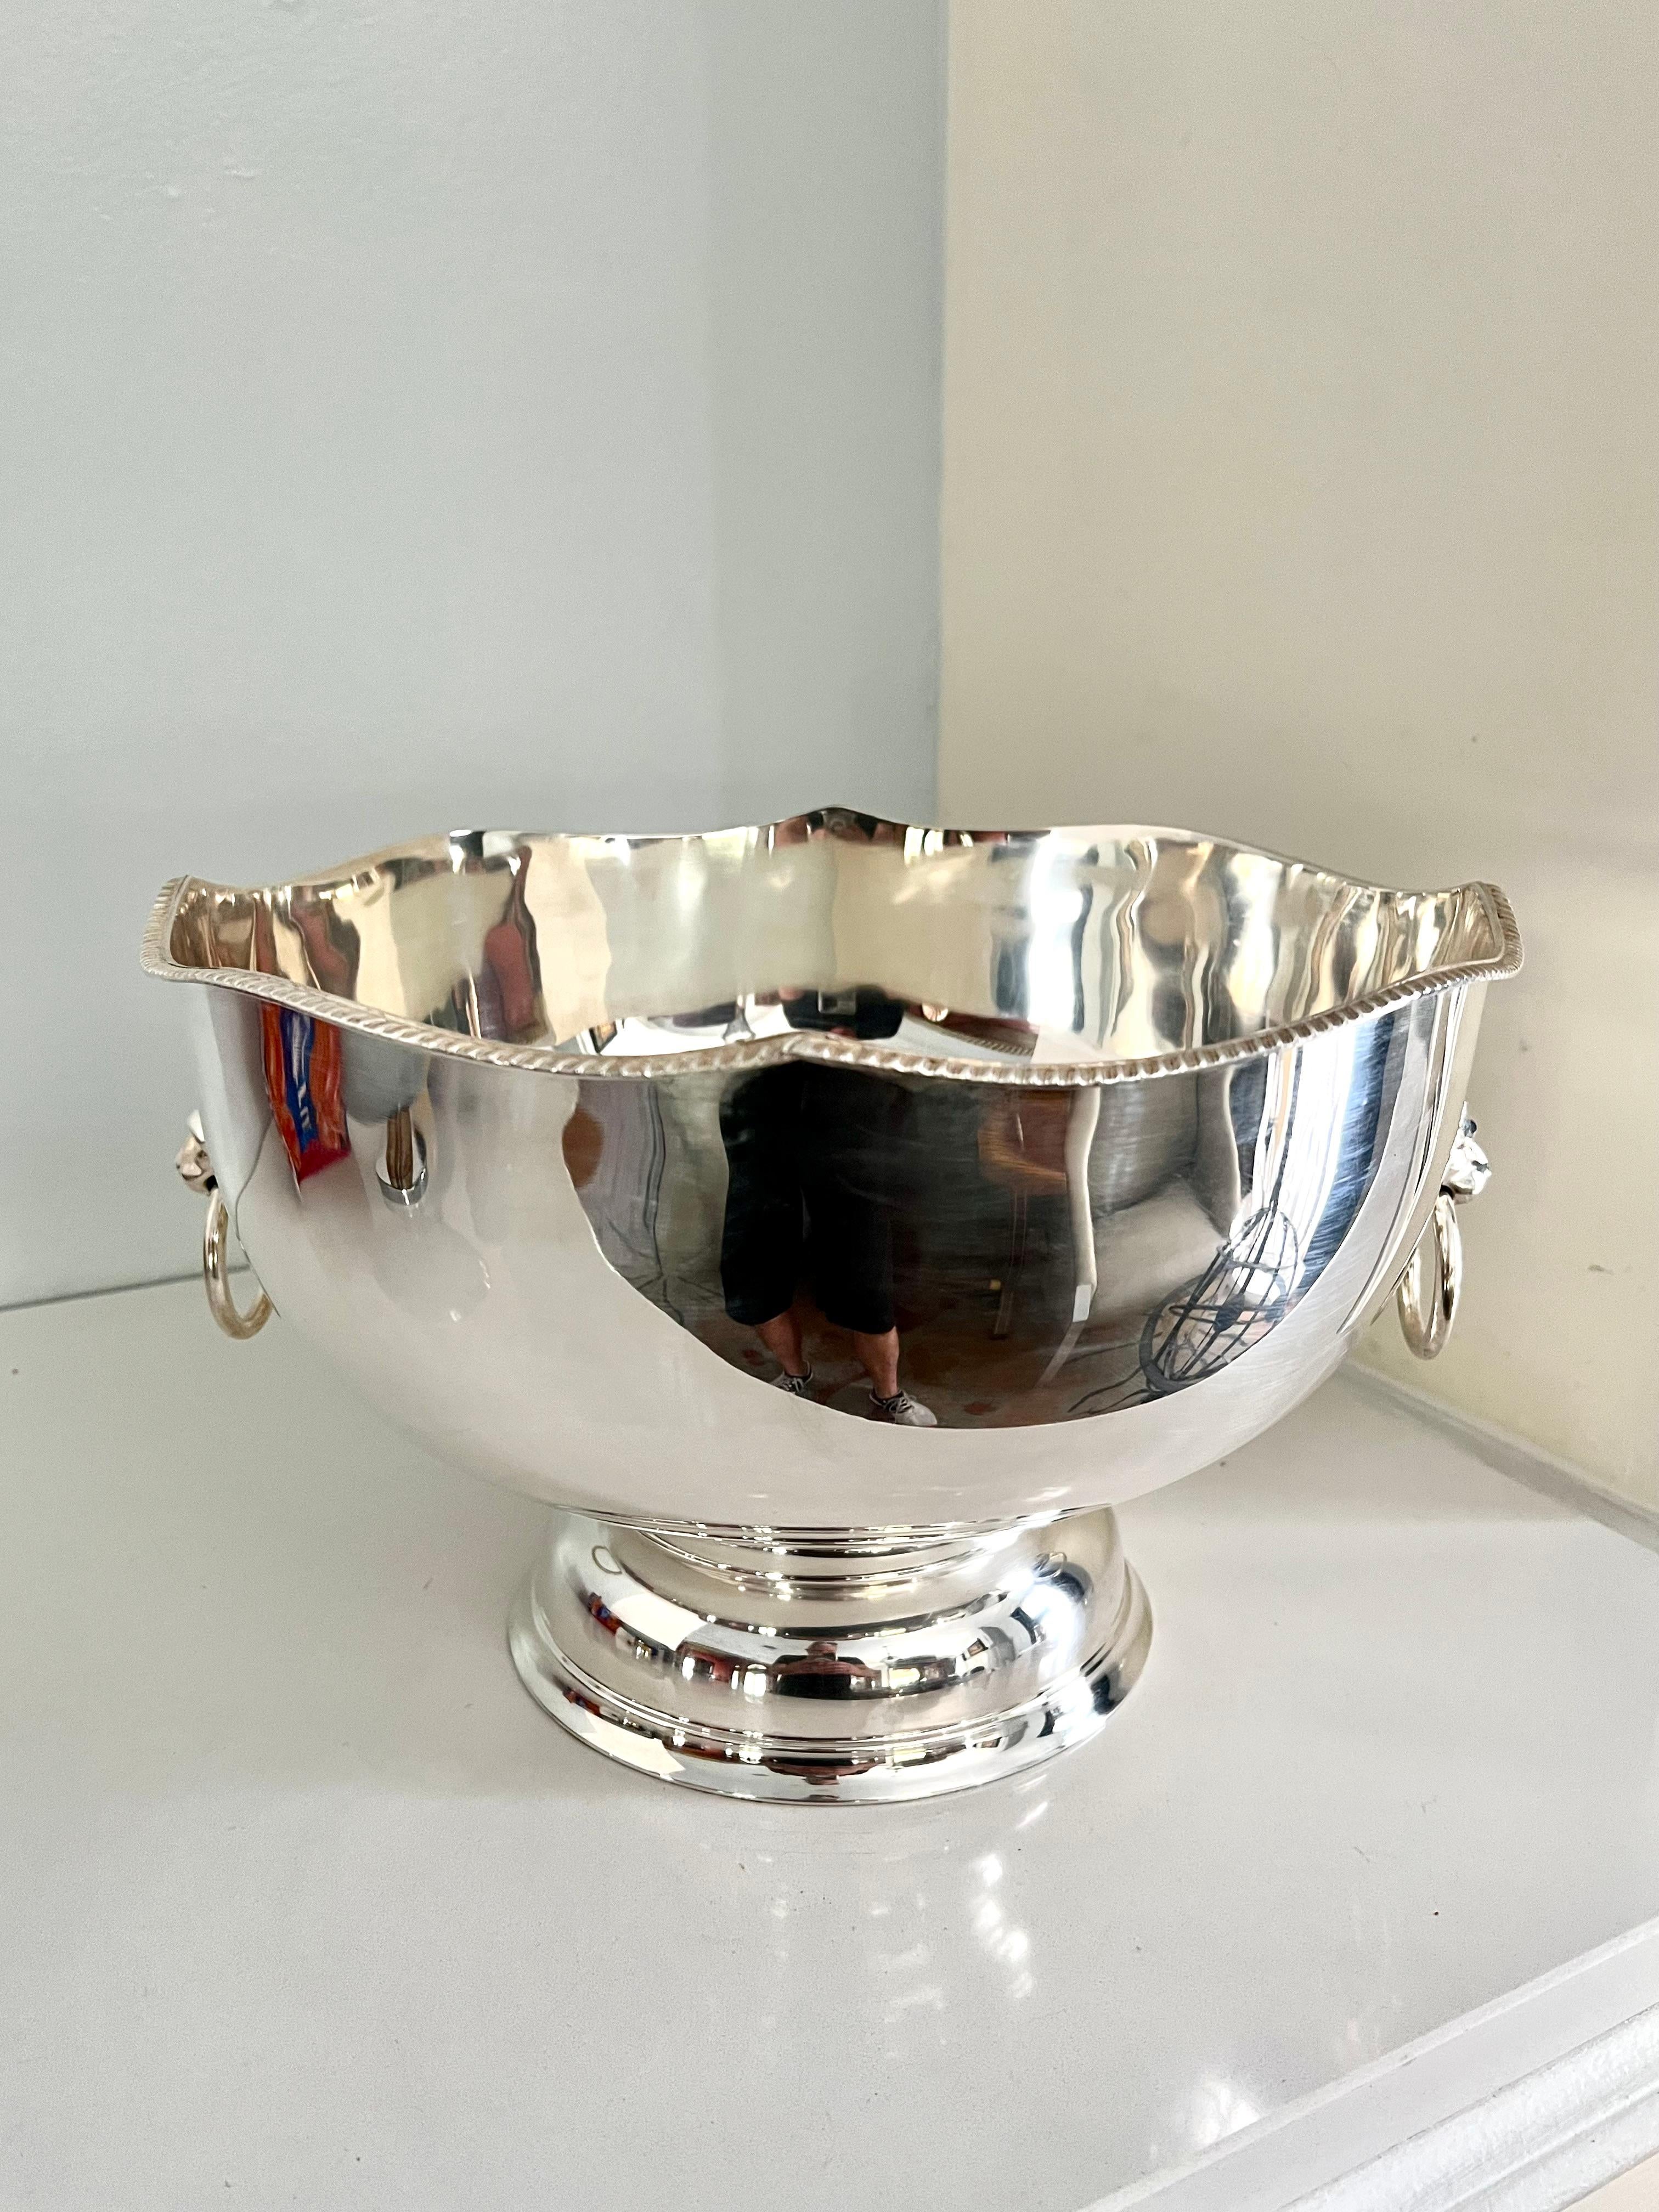 A wonderful English silver plate punch or ice bowl in the style of Sheffield - useful as a decorative piece, a serving piece or even Jardiniere. in very good condition, polished with a detail scallop style edging and a pair of lion heads for handles